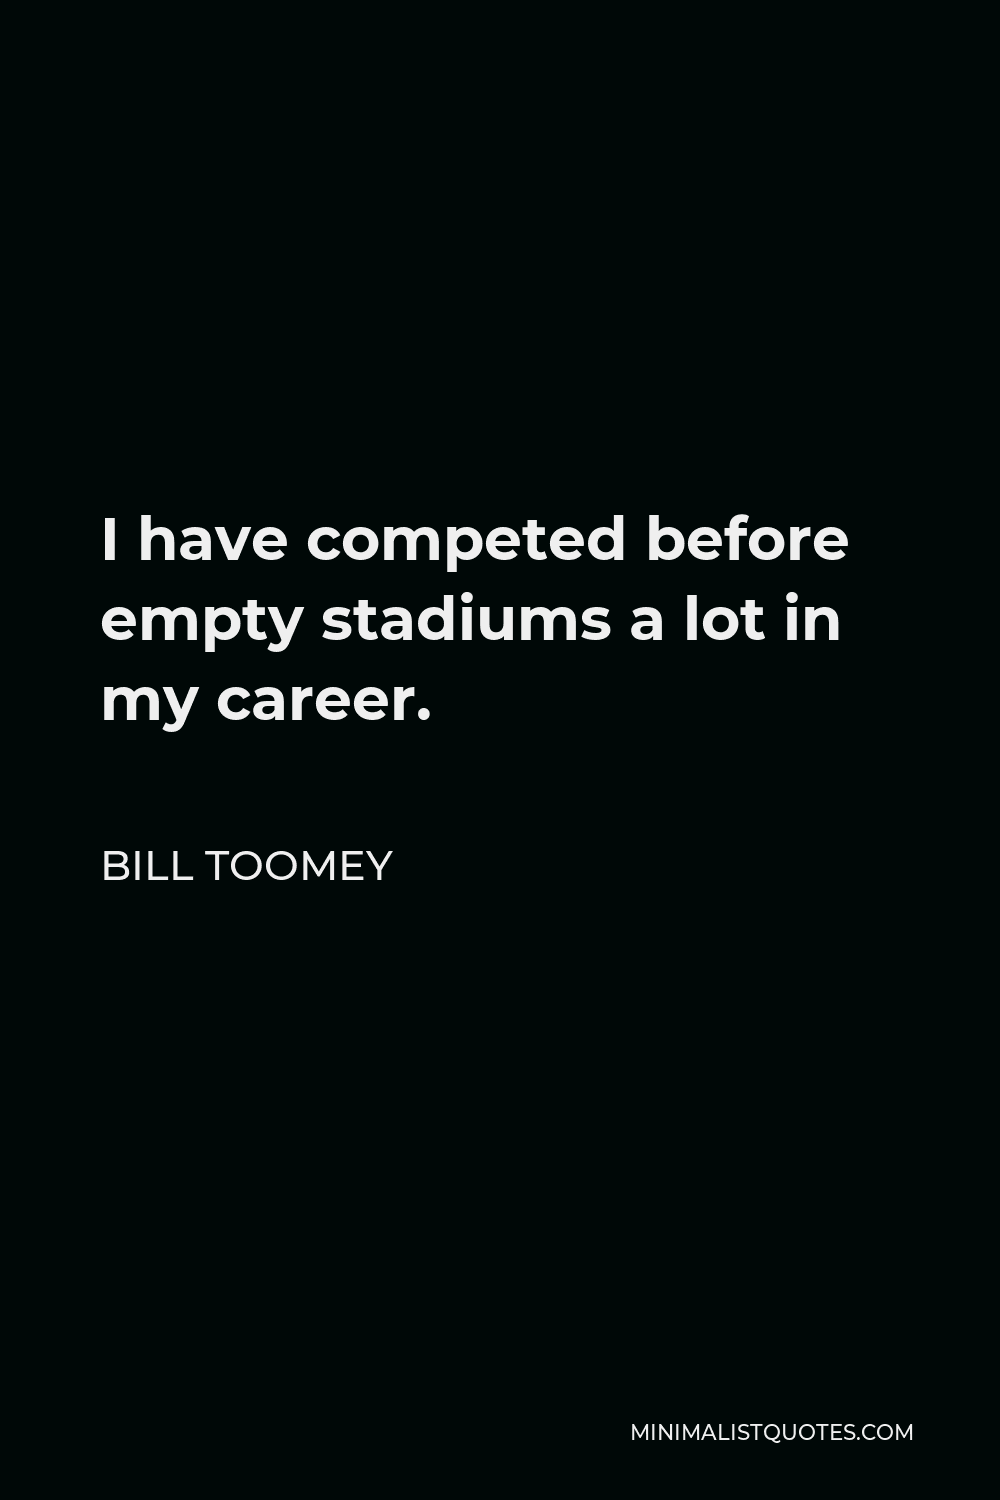 Bill Toomey Quote - I have competed before empty stadiums a lot in my career.